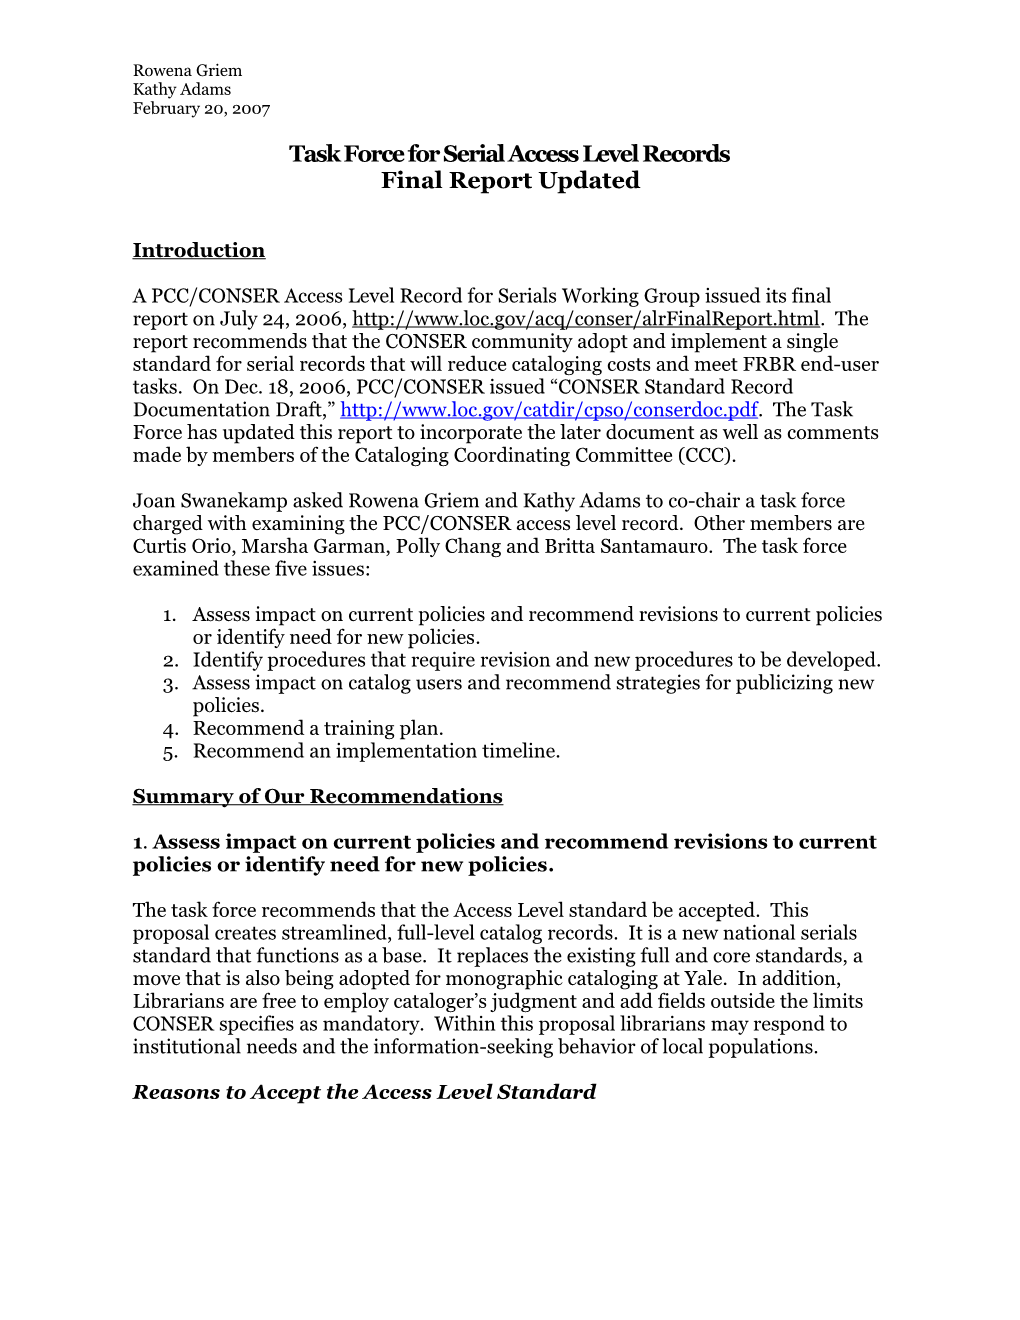 Preliminary Recommendations: Access Level Record Task Force